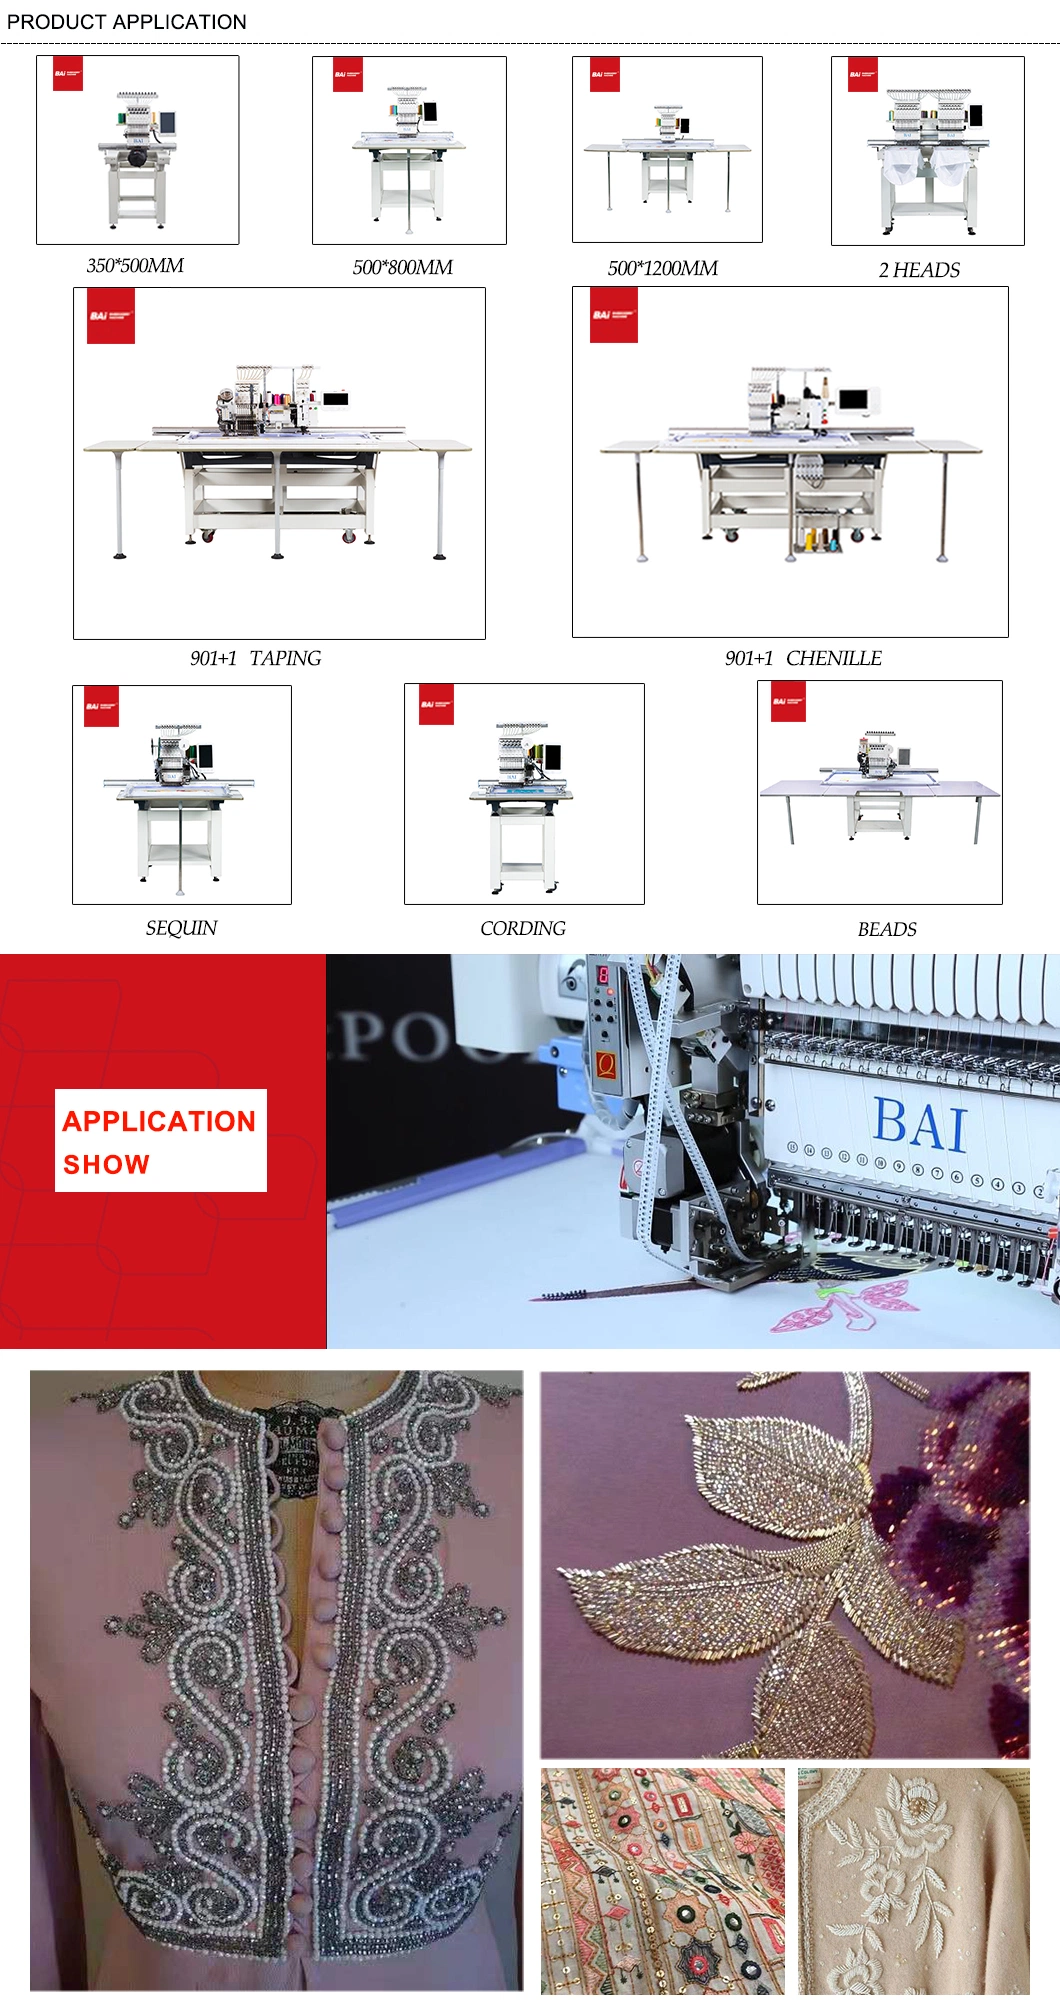 Bai Digital High Speed Computerized Bead Embroidery Machine with Fast Delivery